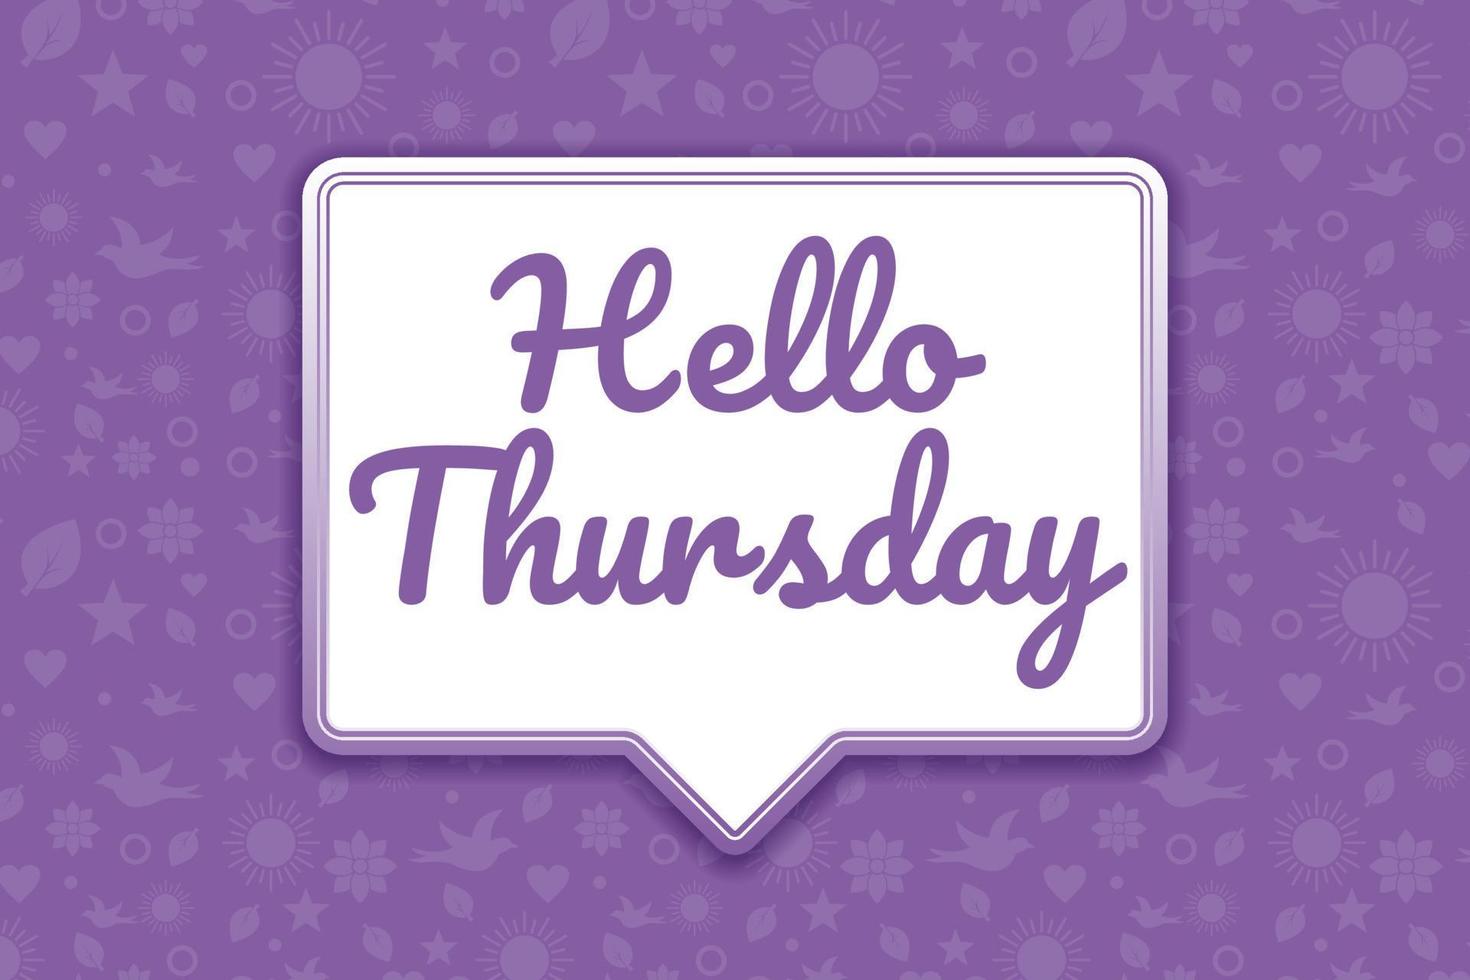 Hello Thursday greeting flat style design, with chat bubble and pattern background vector